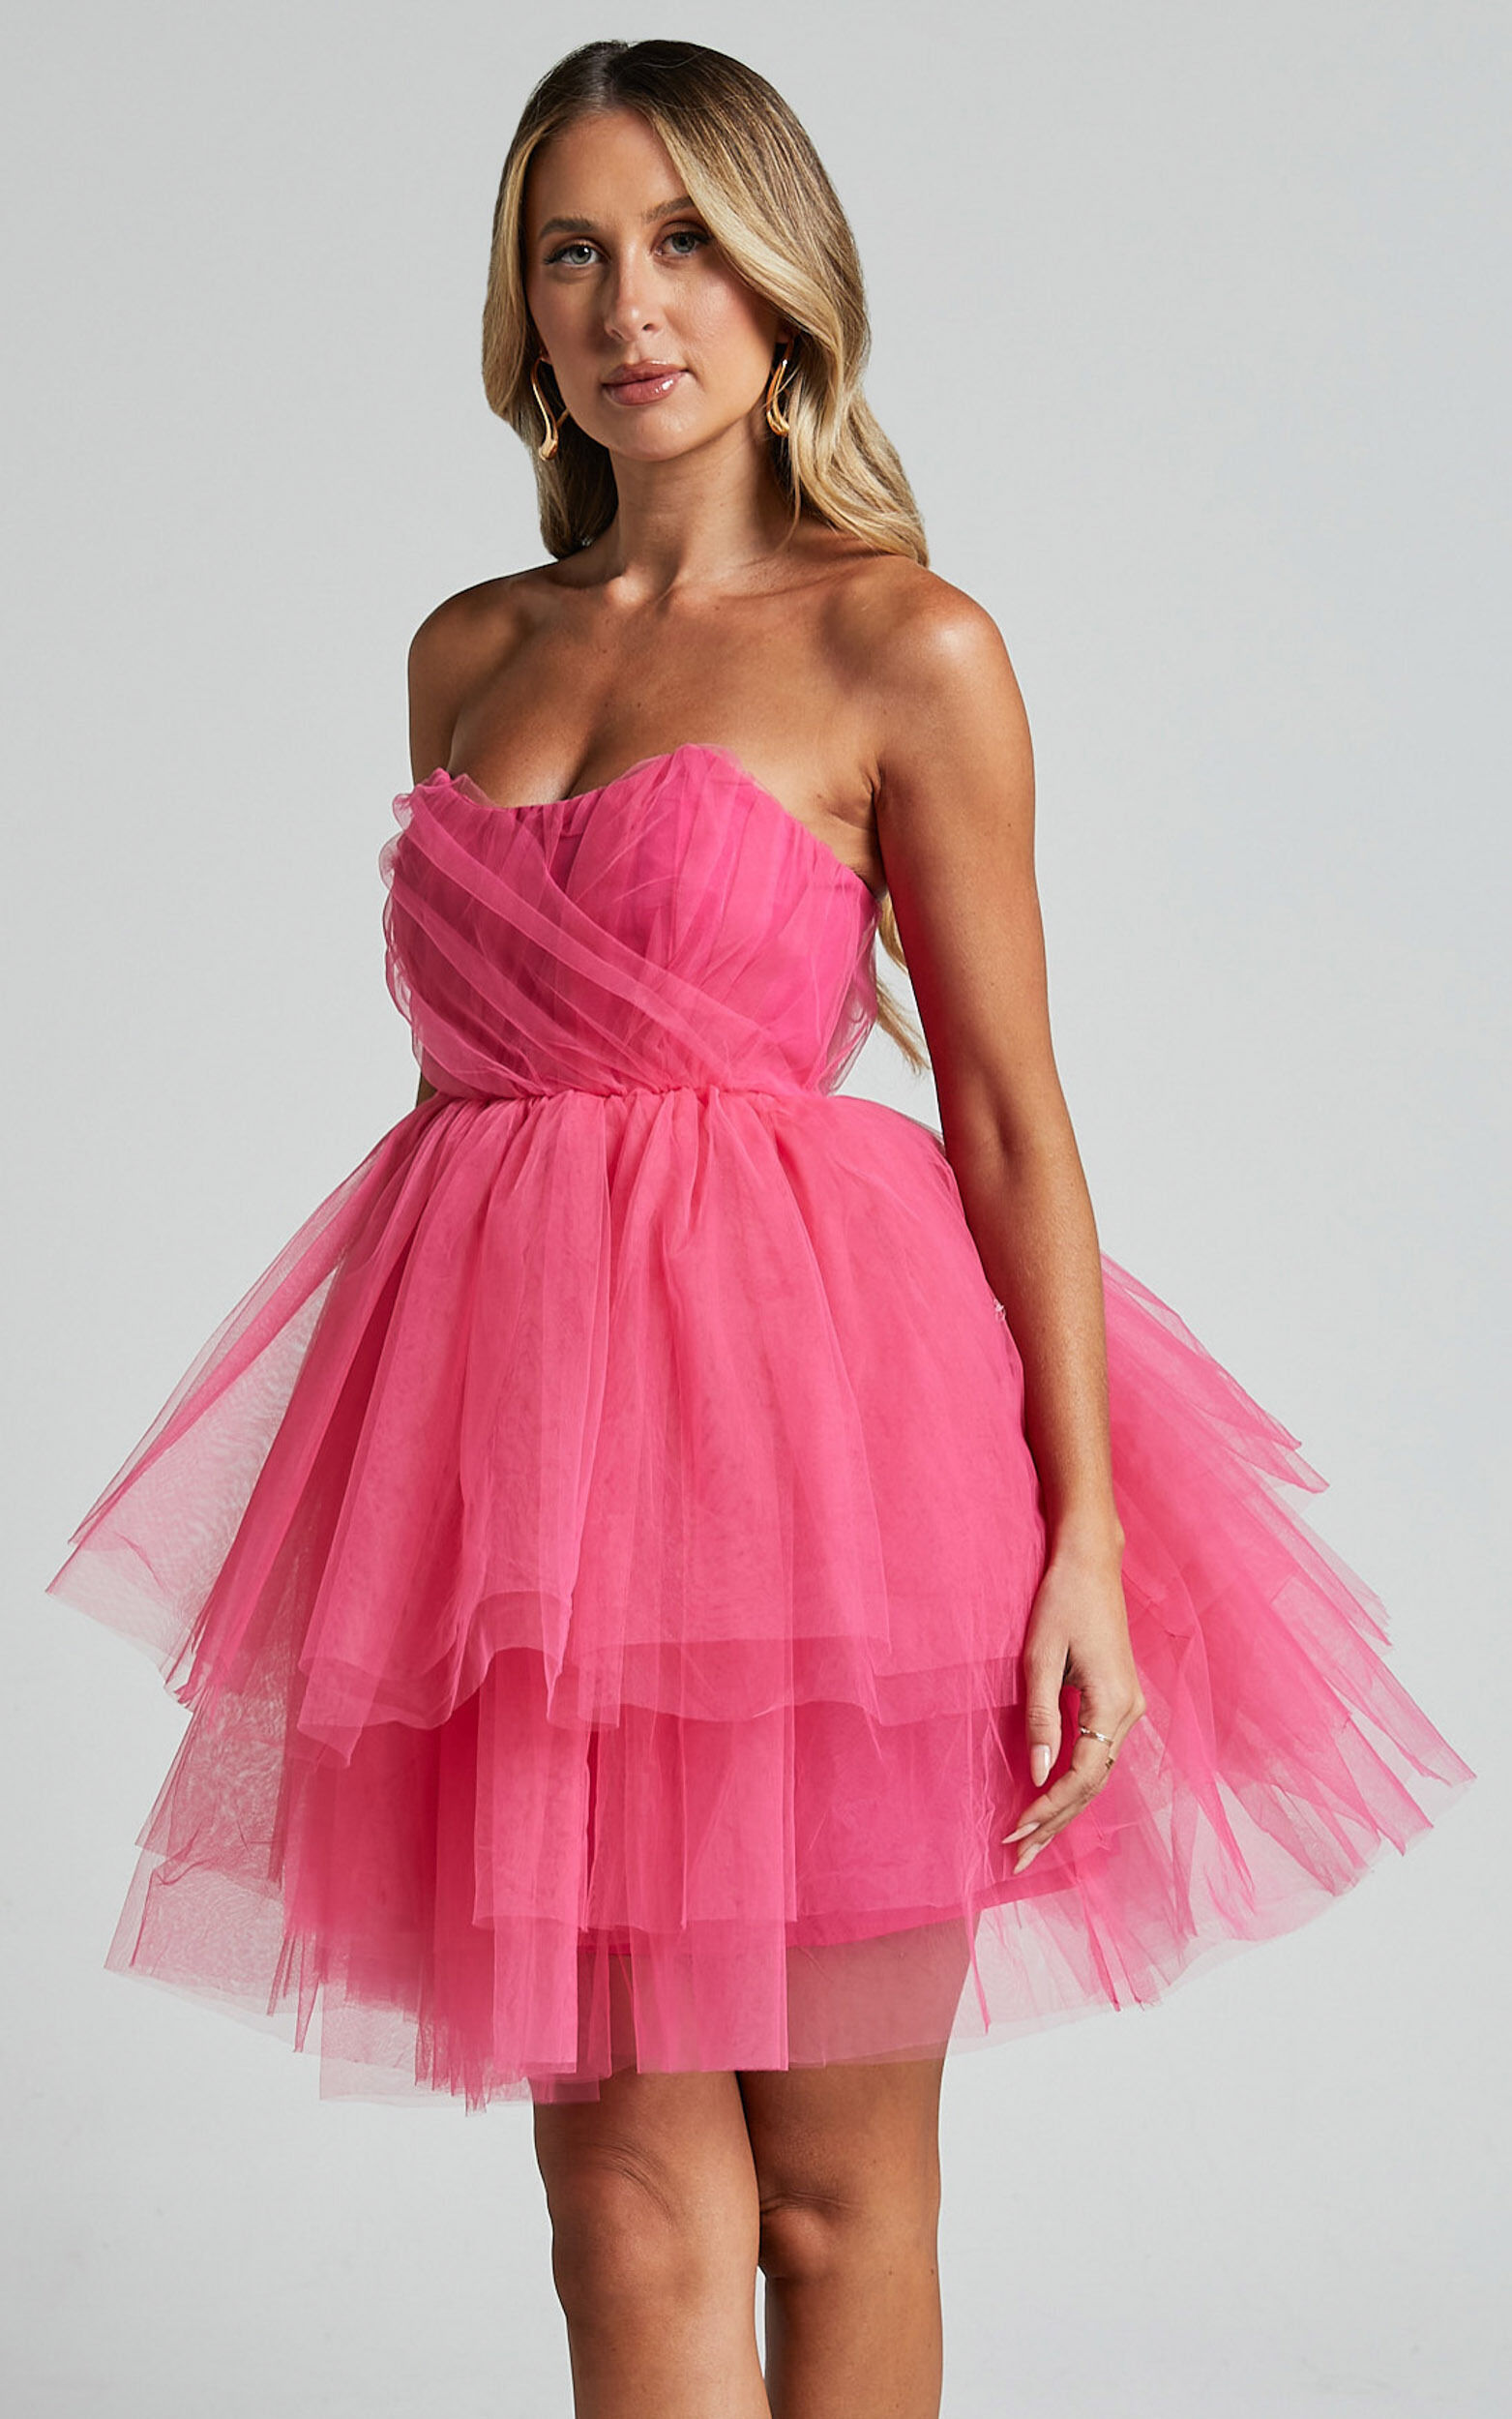 Hot Pink Strapless Tiered Tulle Mini Dress | Womens | Medium (Available in L) | 100% Polyester | Lulus